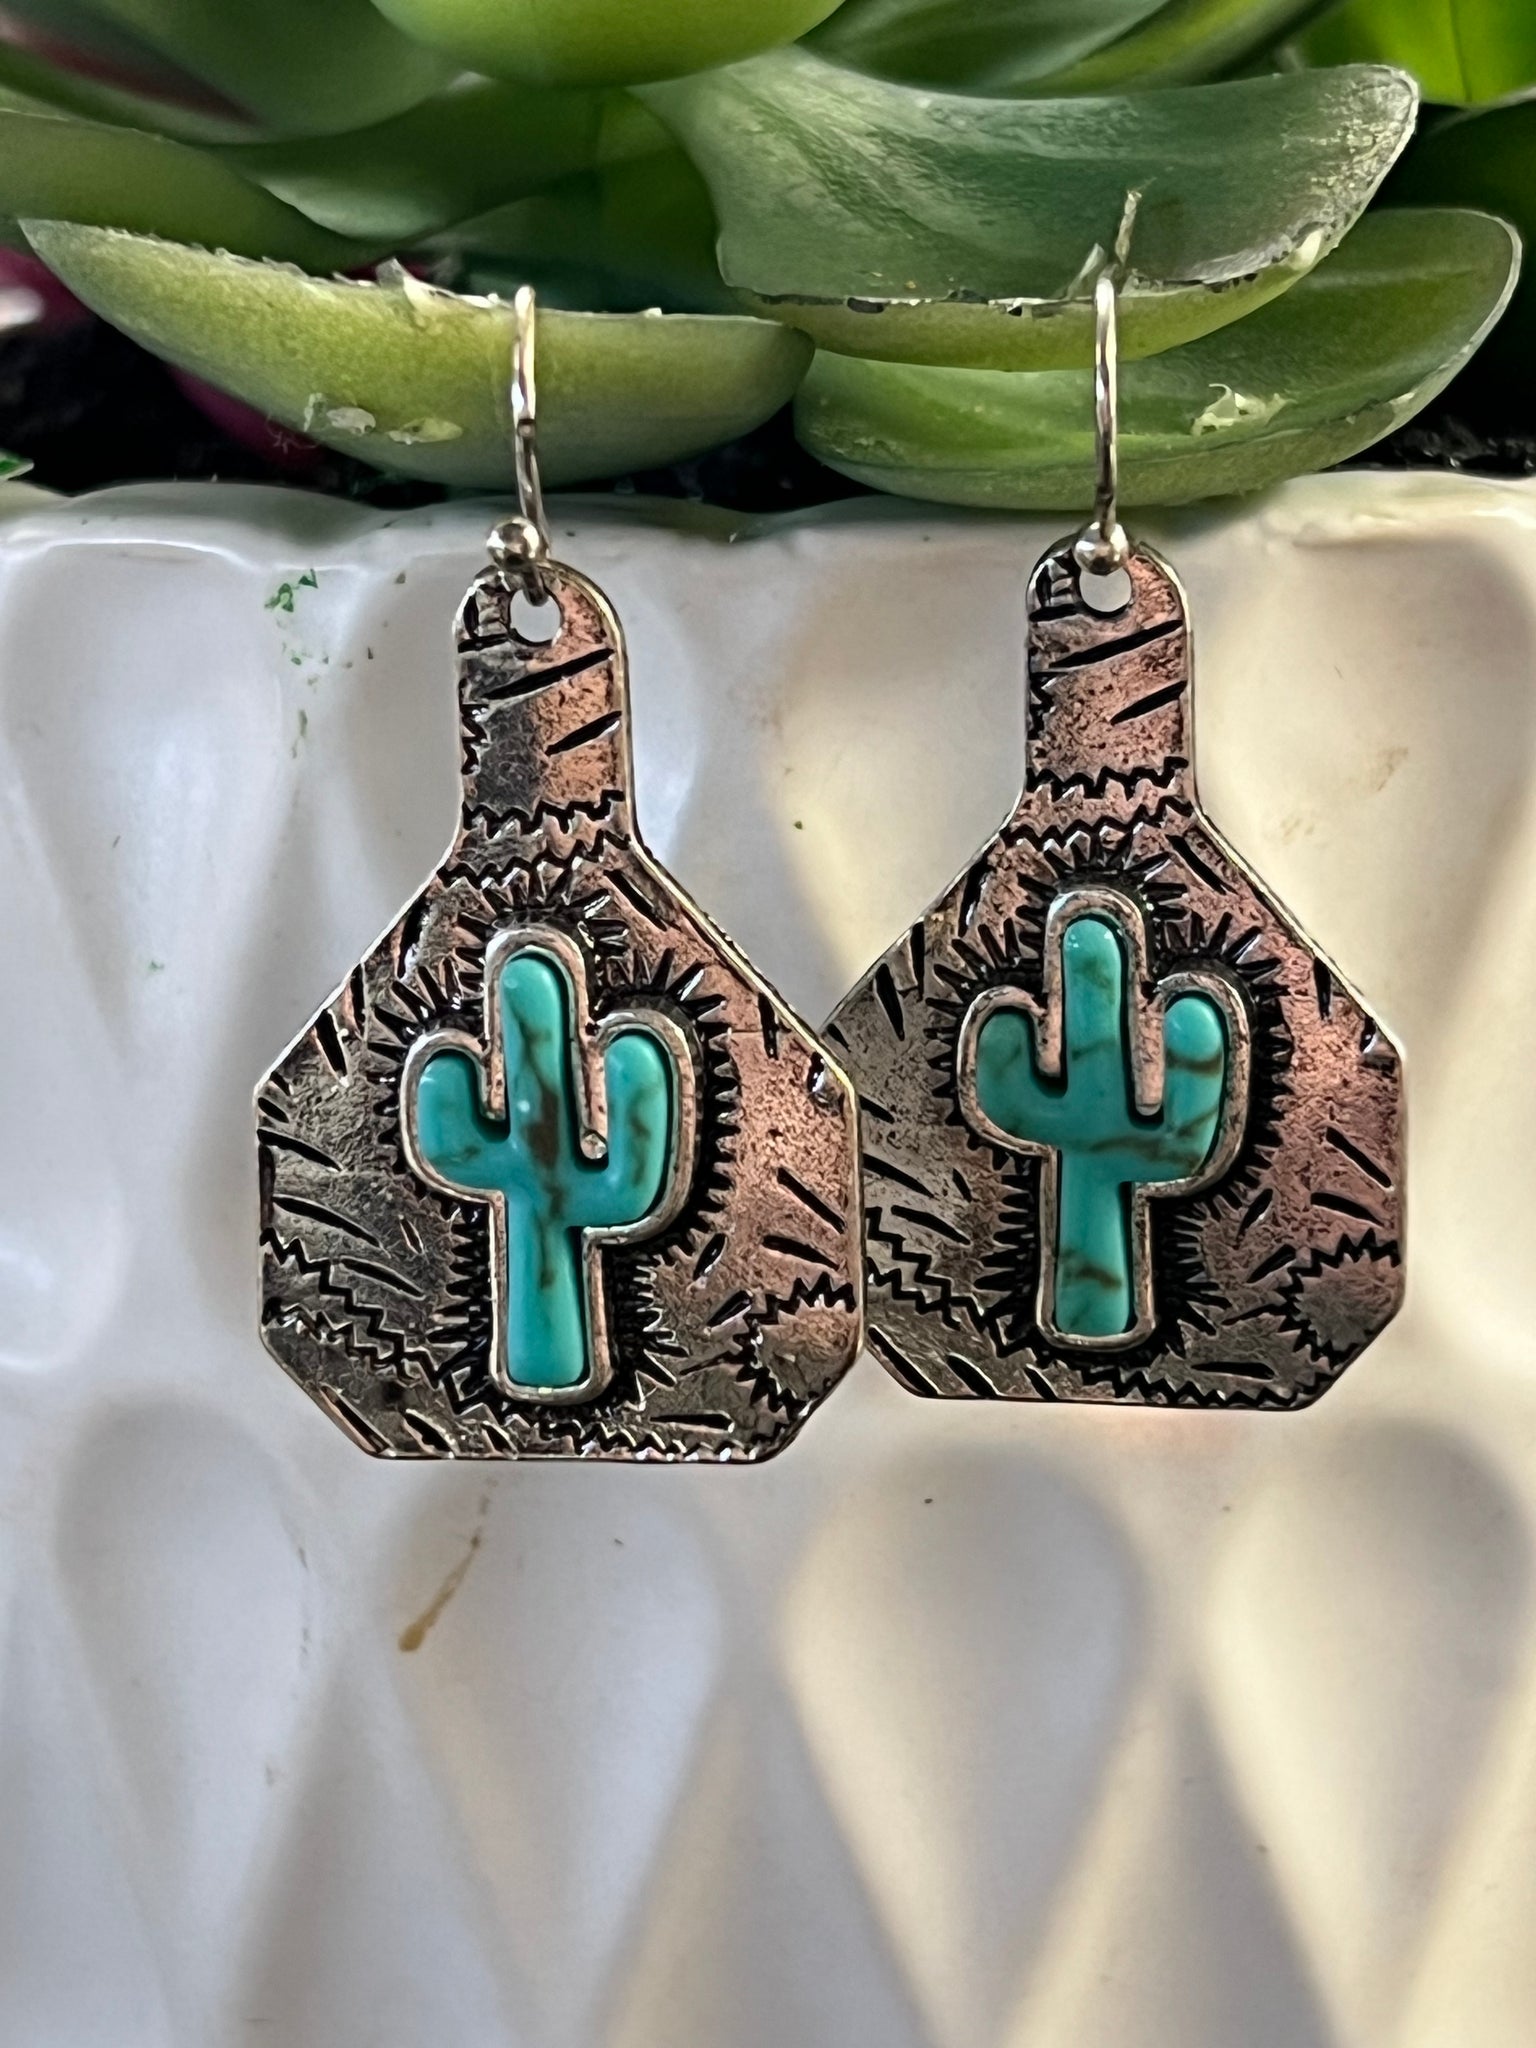 CATTLE TAG CACTUS EARRINGS